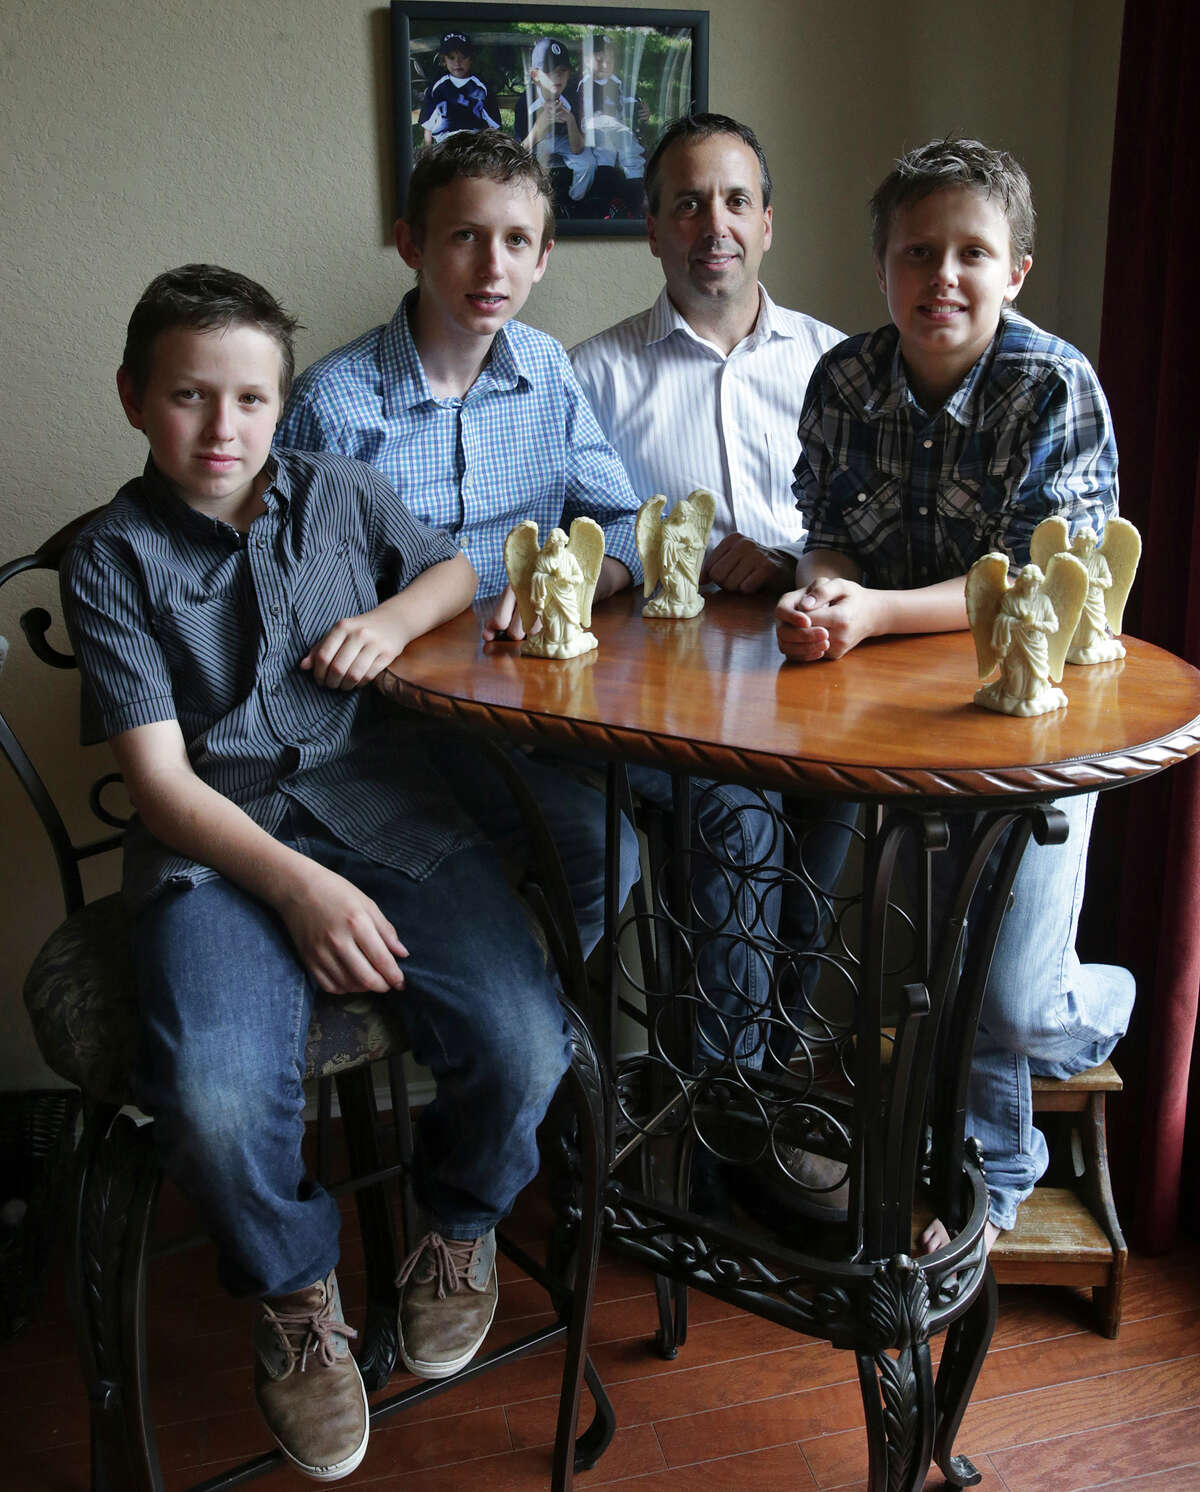 Teddy Voutour relaxes at home with his sons (from left) Skyler, Teddy and Tanner. The family was “hit by a freight train” when the boys’ mother died in 2012, Voutour said.